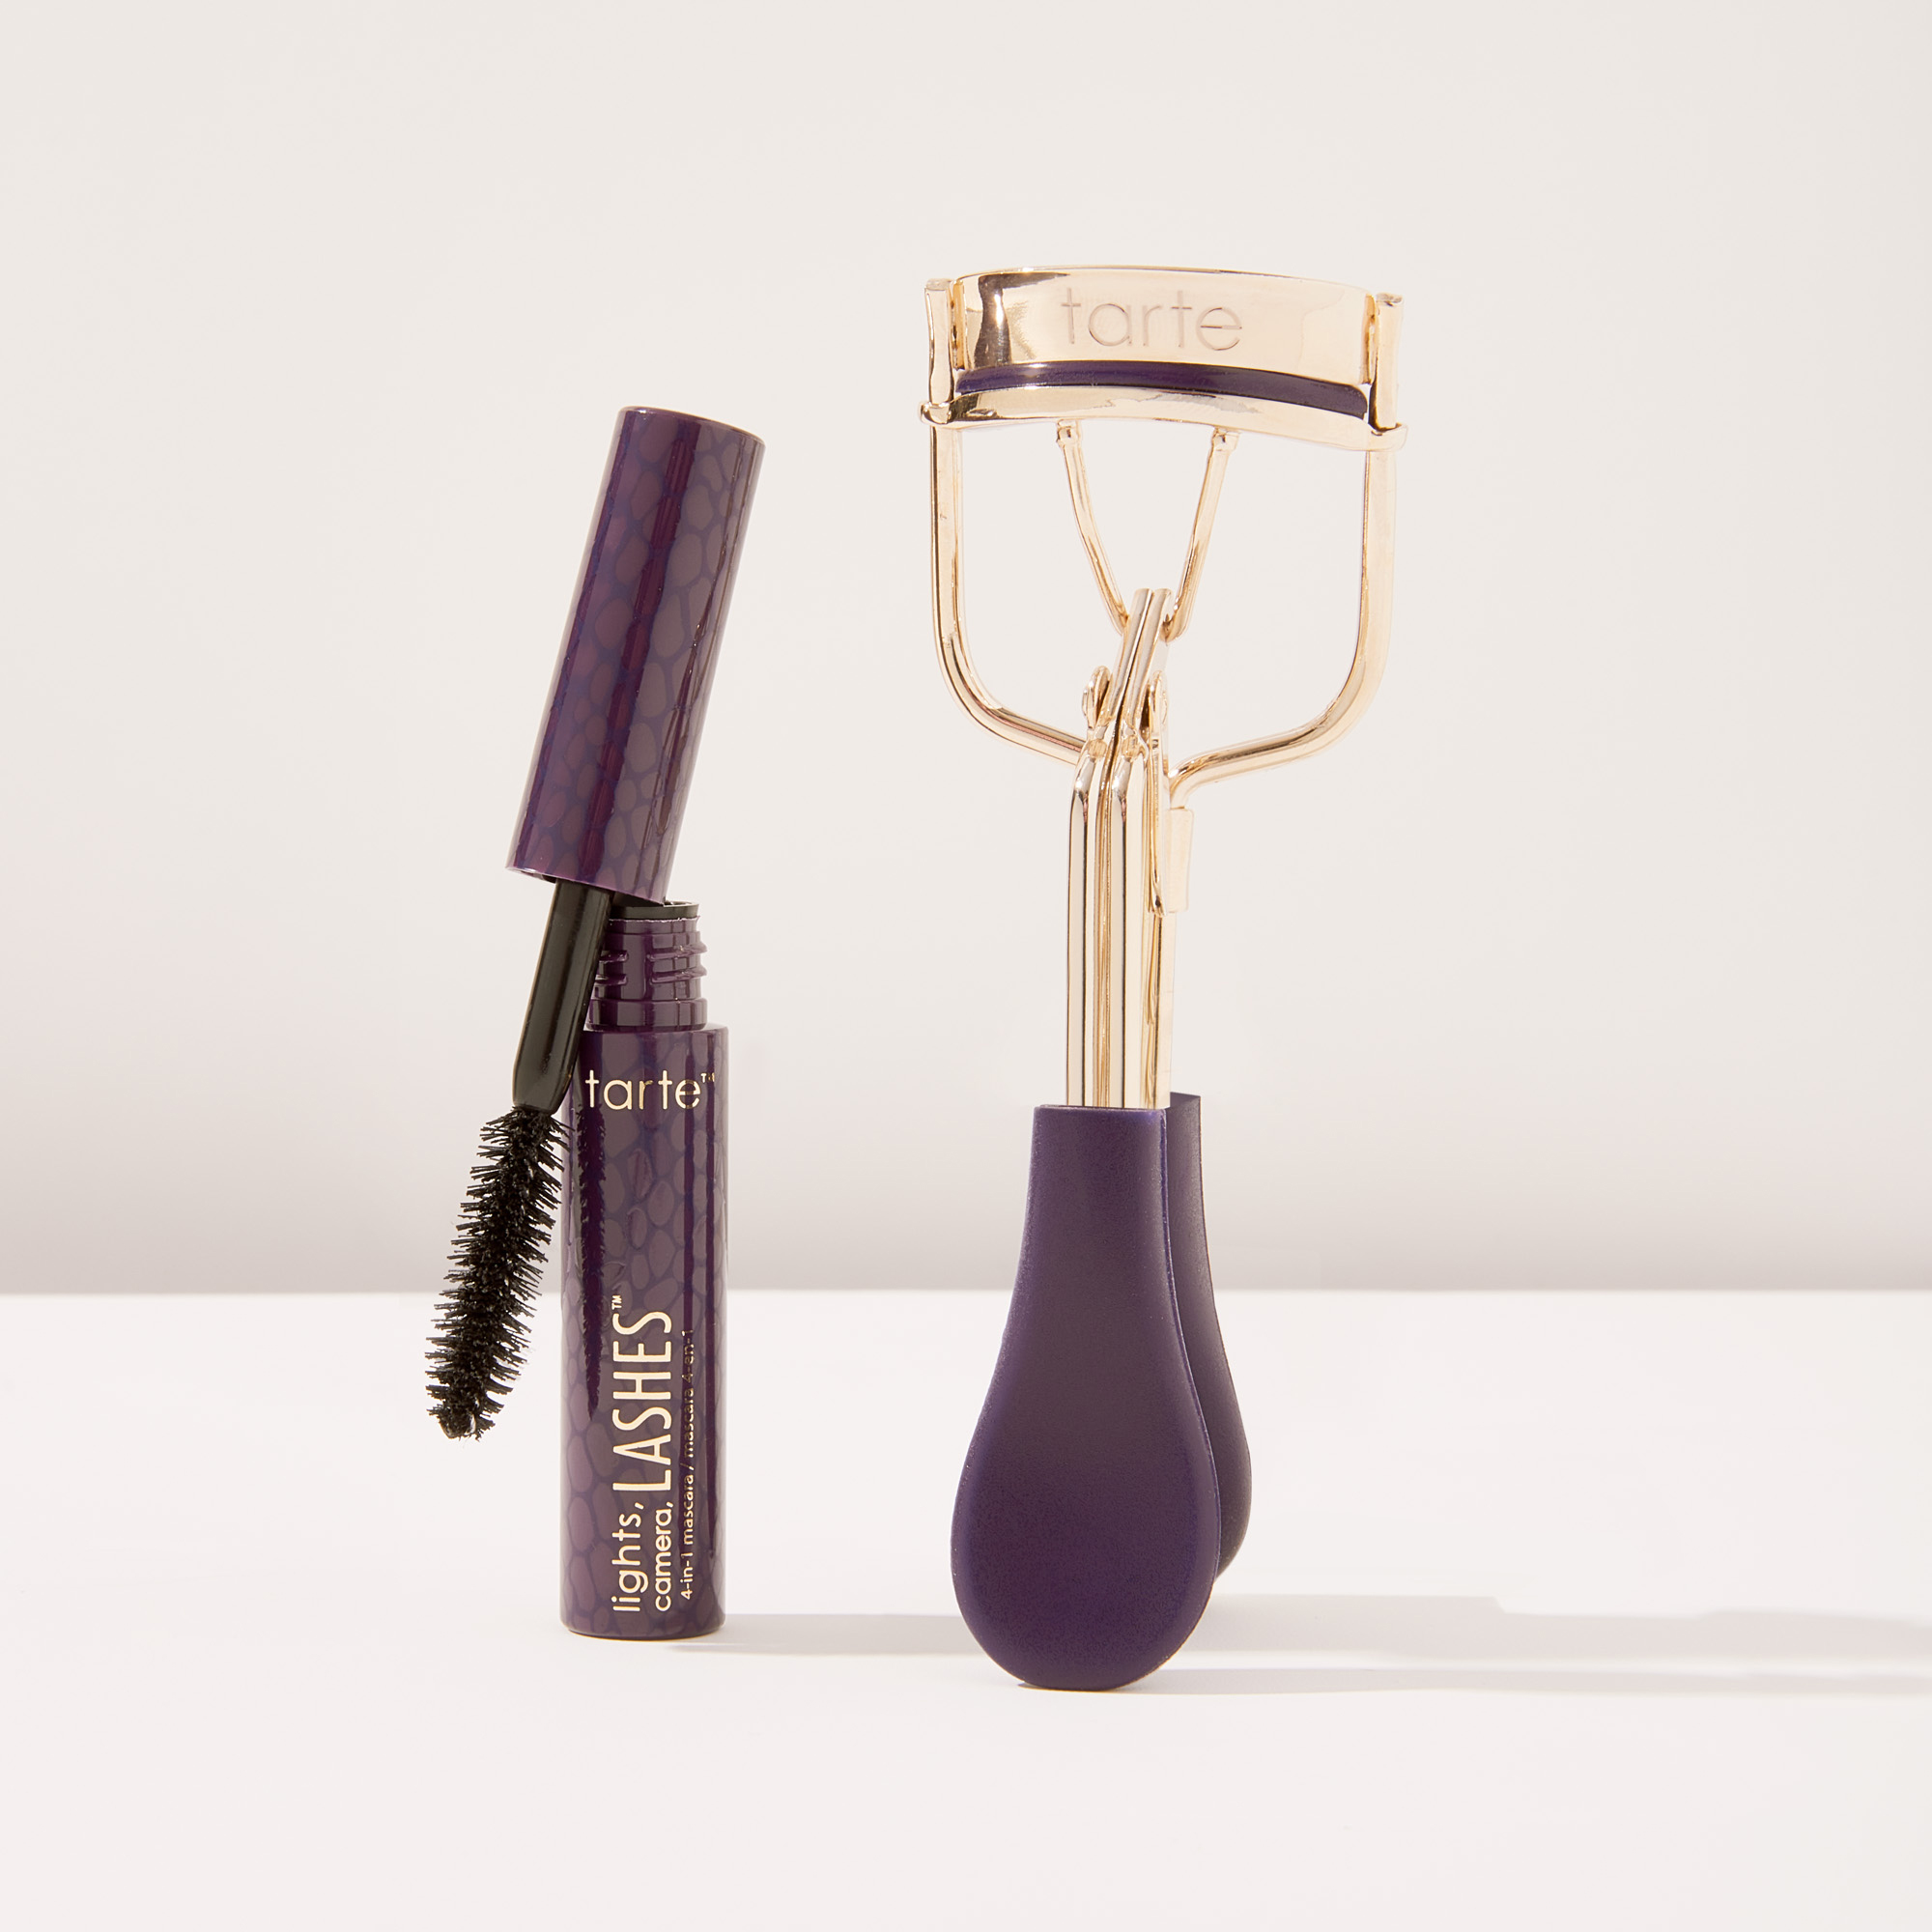 How To Use an Eyelash Curler the Right Way